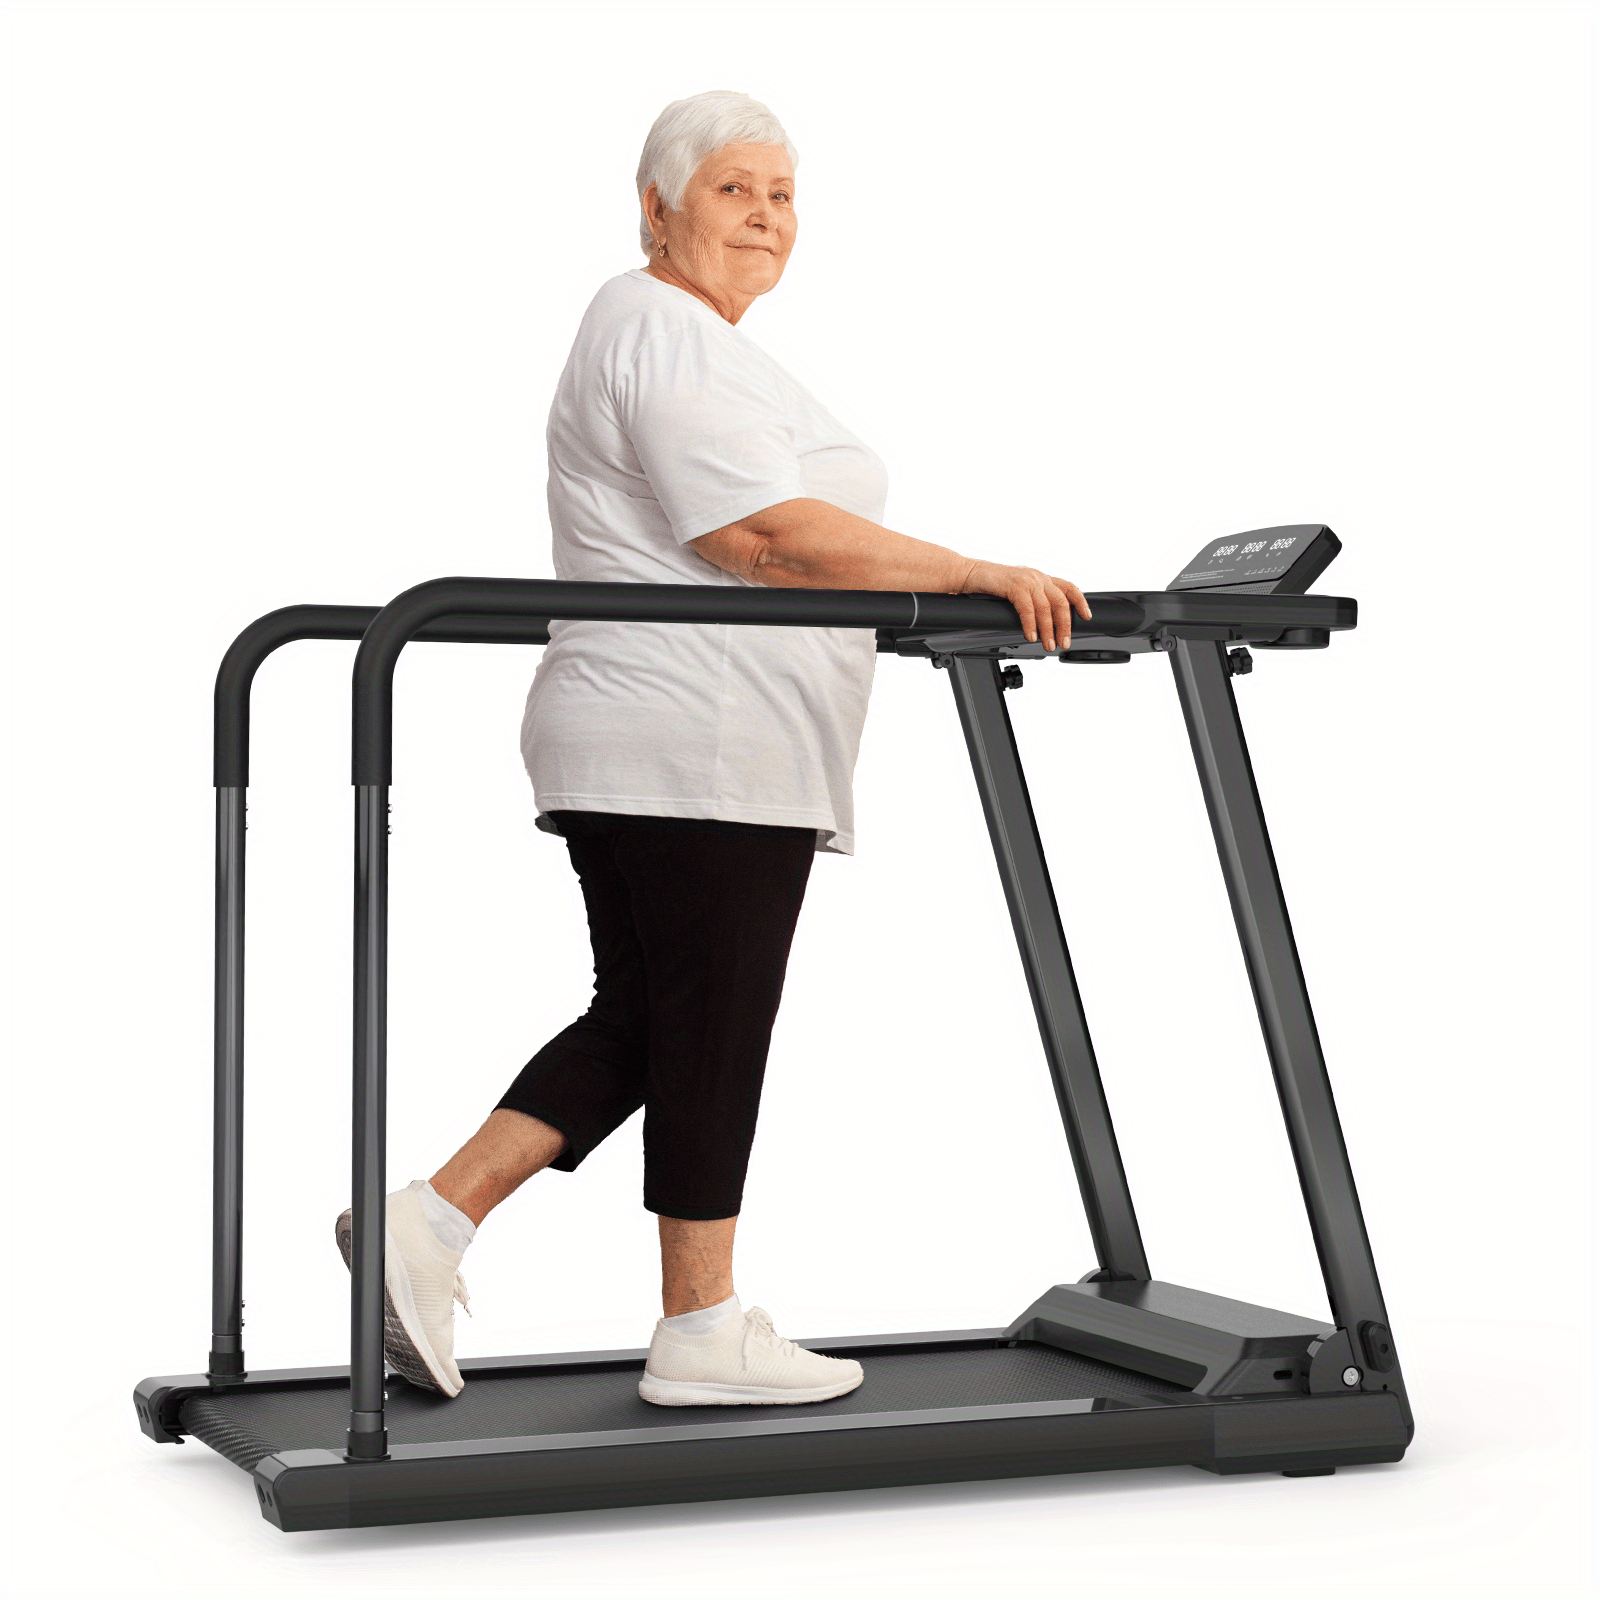 

Walking Pad Treadmill For Senior, Foldable Exercise Treadmill With Stable And Safe Structural Design, Large Led Display For Elderly, Long Handrail For Balance, 300 Lbs Capacity